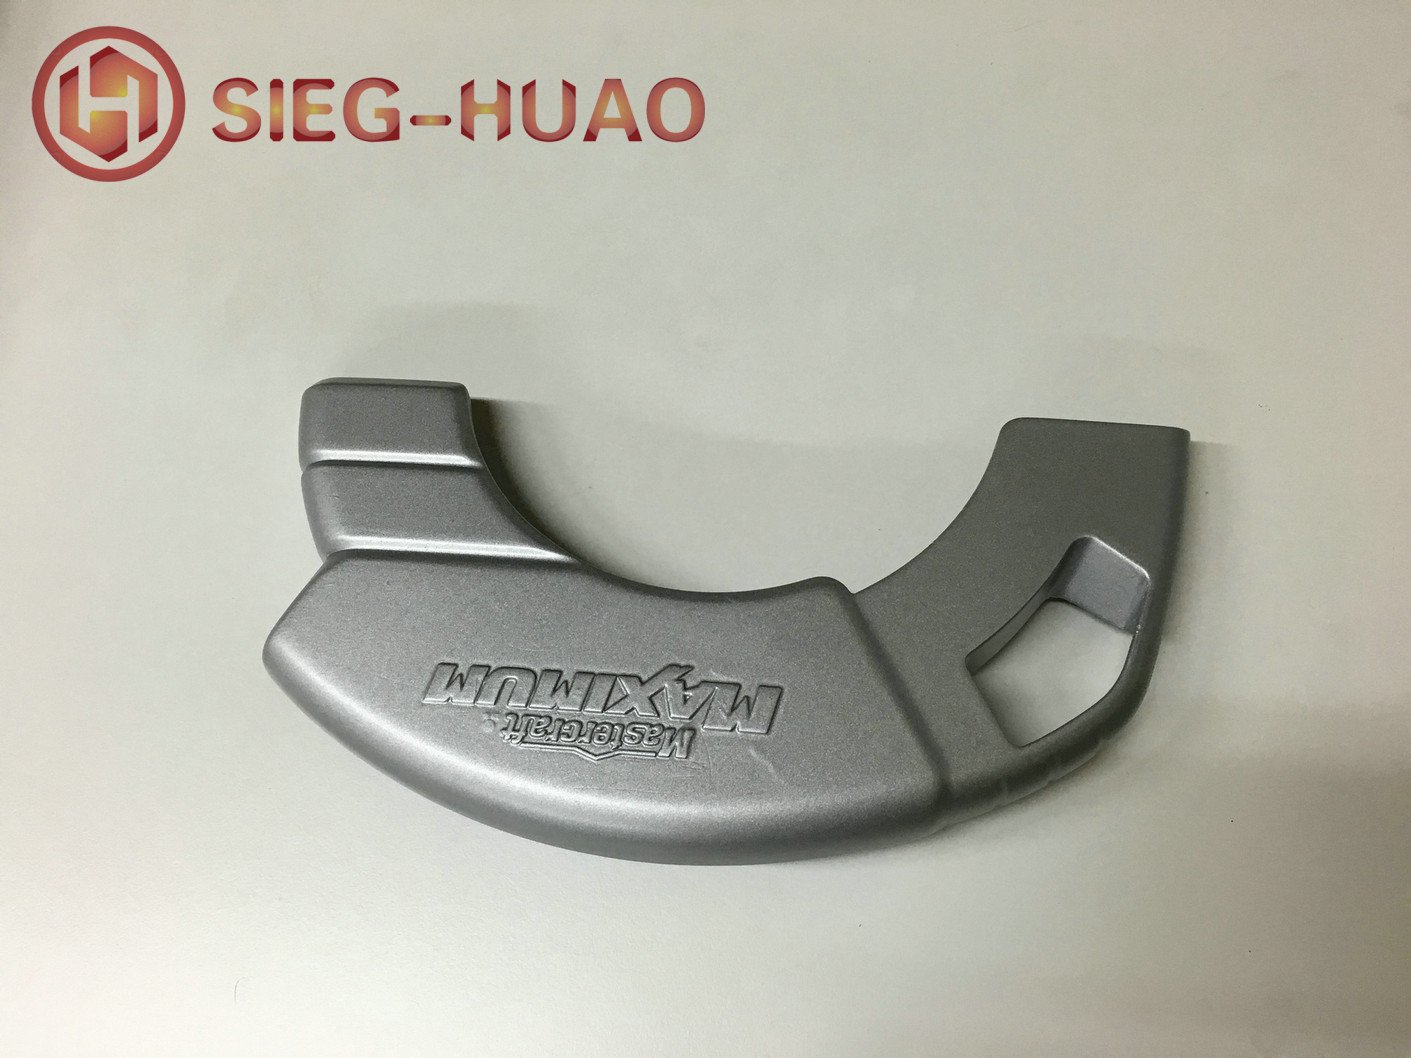 Magnesium Alloy Die Casting Powder Coated Butt Plate for Lawn Mower